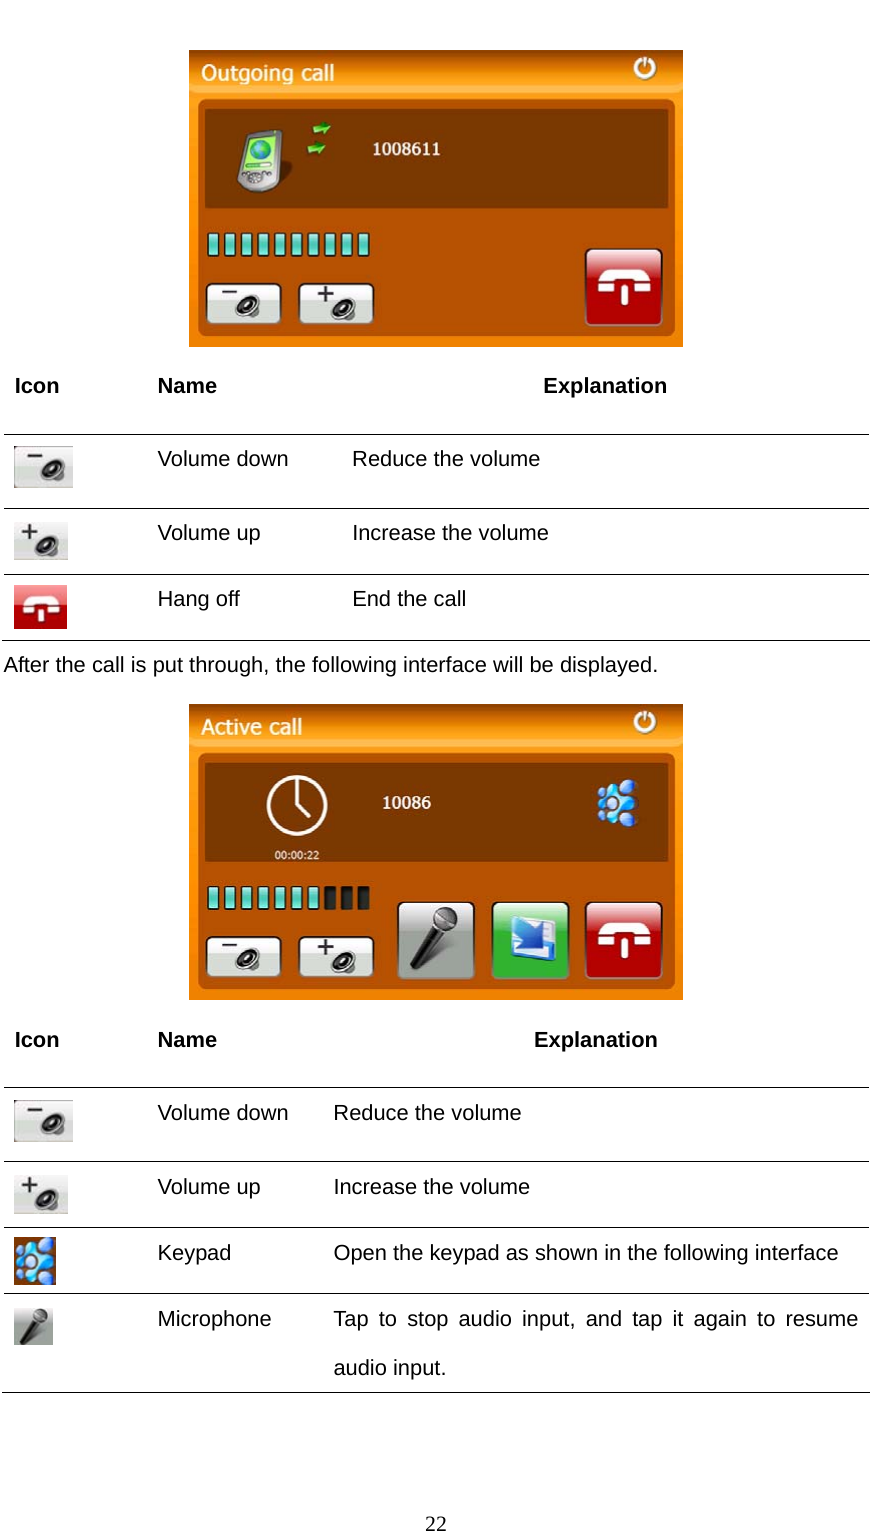  22  Icon Name  Explanation  Volume down  Reduce the volume  Volume up  Increase the volume  Hang off  End the call After the call is put through, the following interface will be displayed.  Icon Name  Explanation  Volume down  Reduce the volume  Volume up  Increase the volume  Keypad  Open the keypad as shown in the following interface  Microphone  Tap to stop audio input, and tap it again to resume audio input. 